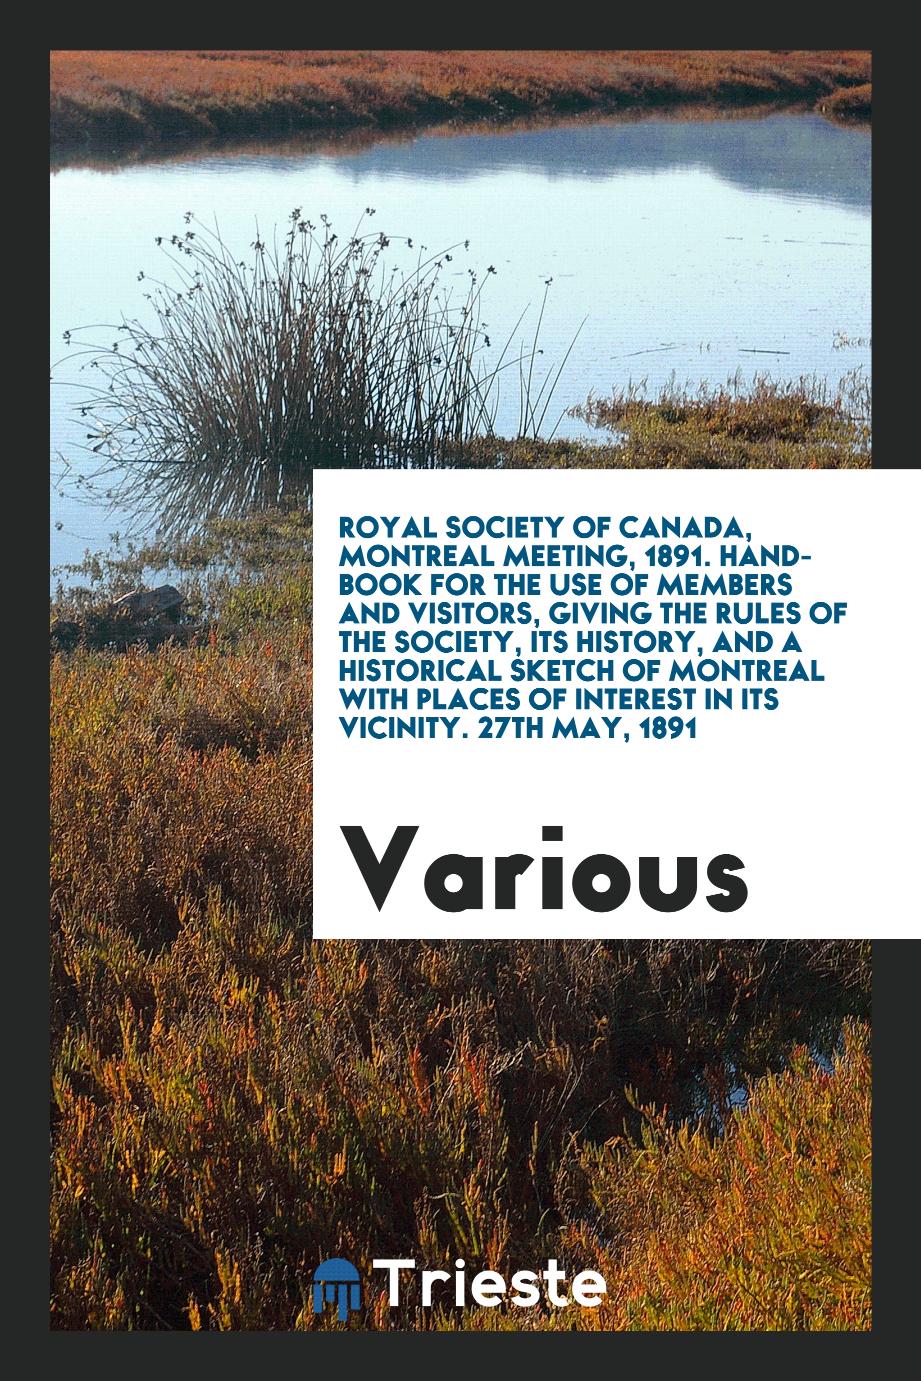 Royal Society of Canada, Montreal Meeting, 1891. Hand-Book for the Use of Members and Visitors, Giving the Rules of the Society, Its History, and a Historical Sketch of Montreal with Places of Interest in Its Vicinity. 27th May, 1891